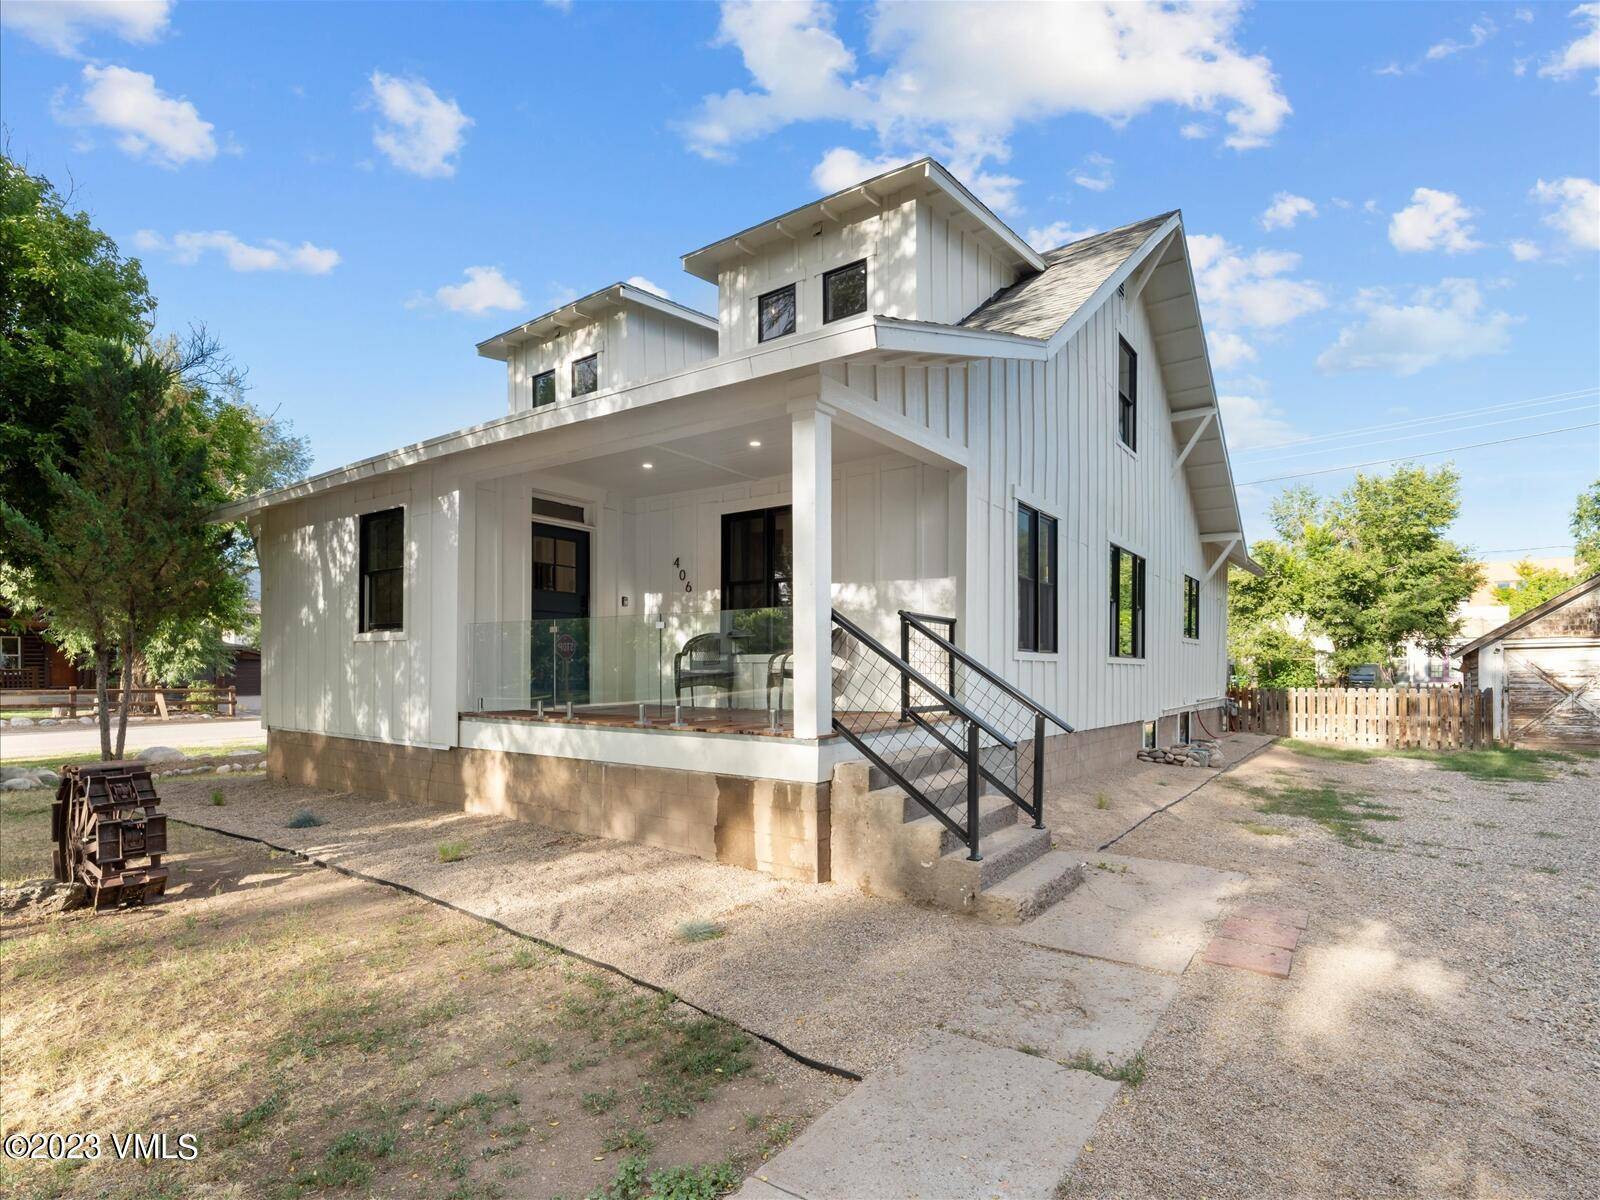 Unique opportunity to own a fully remodeled home in the heart of Old Town Eagle.